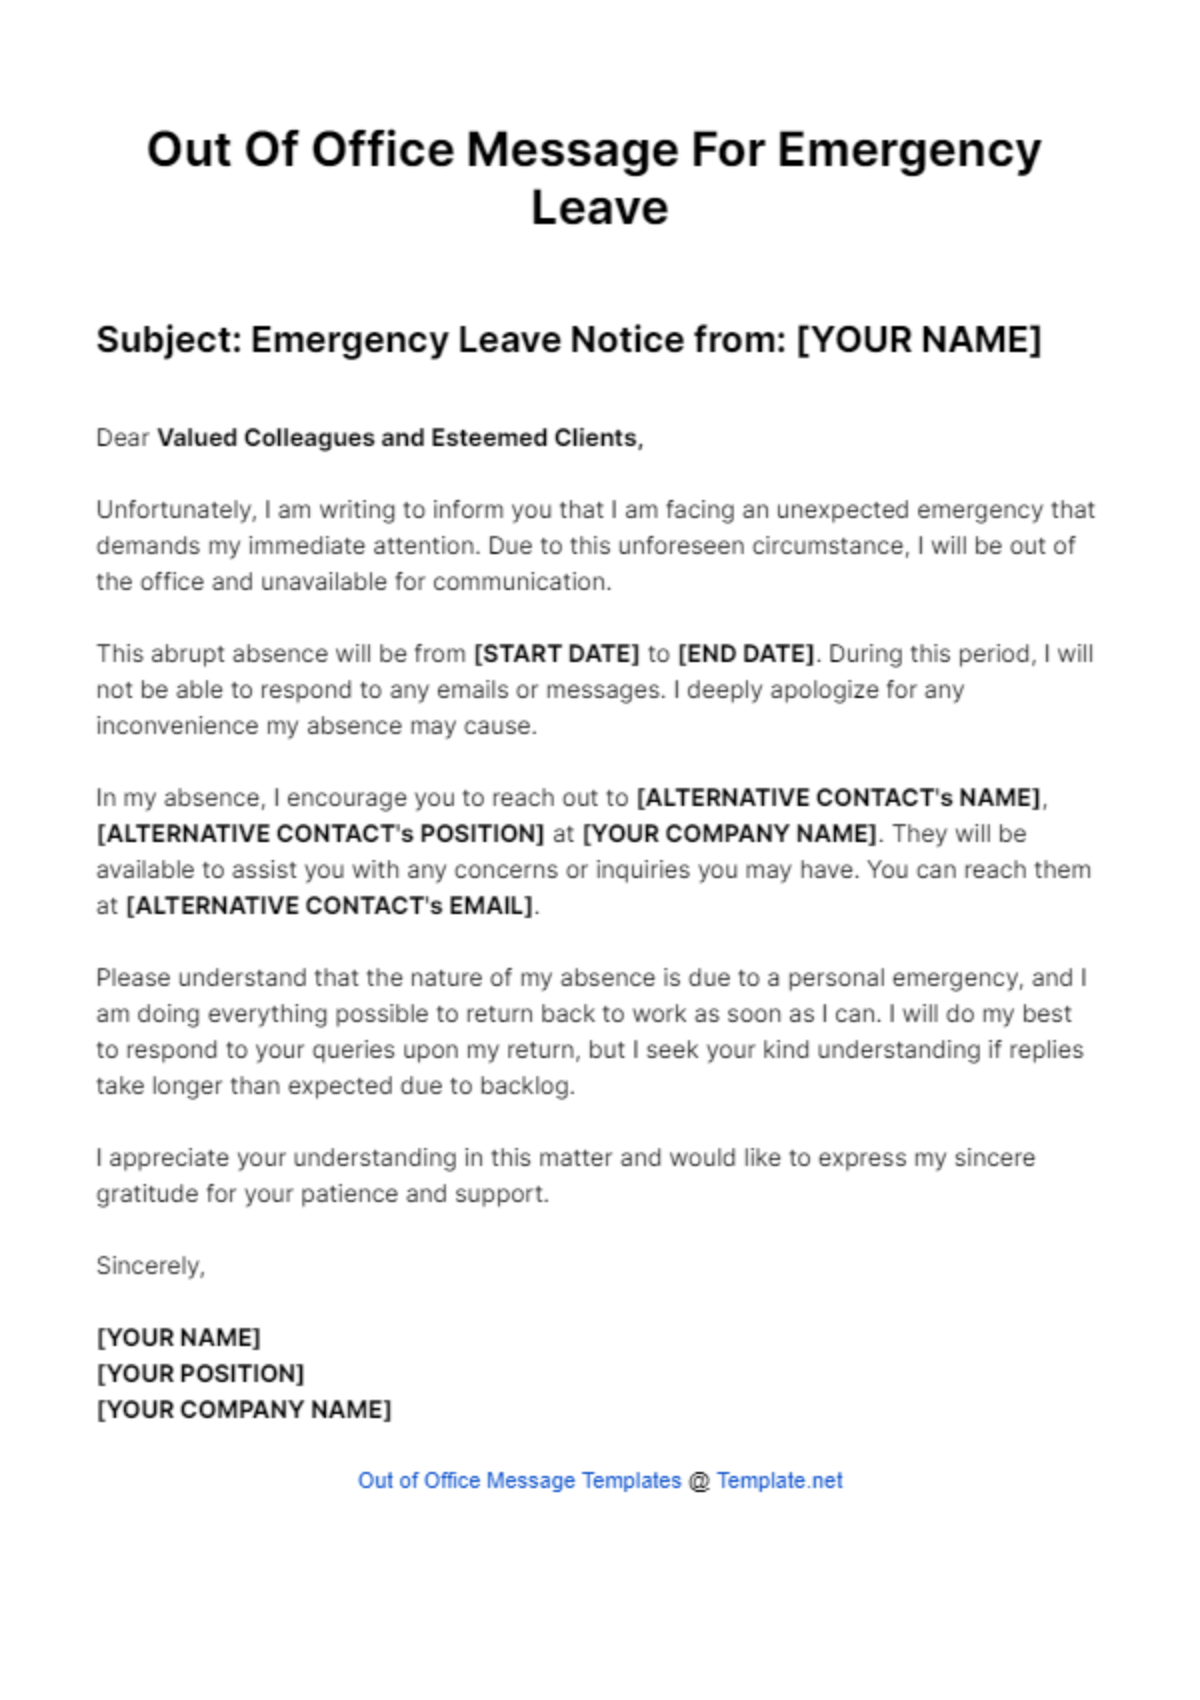 Out Of Office Message For Emergency Leave Template